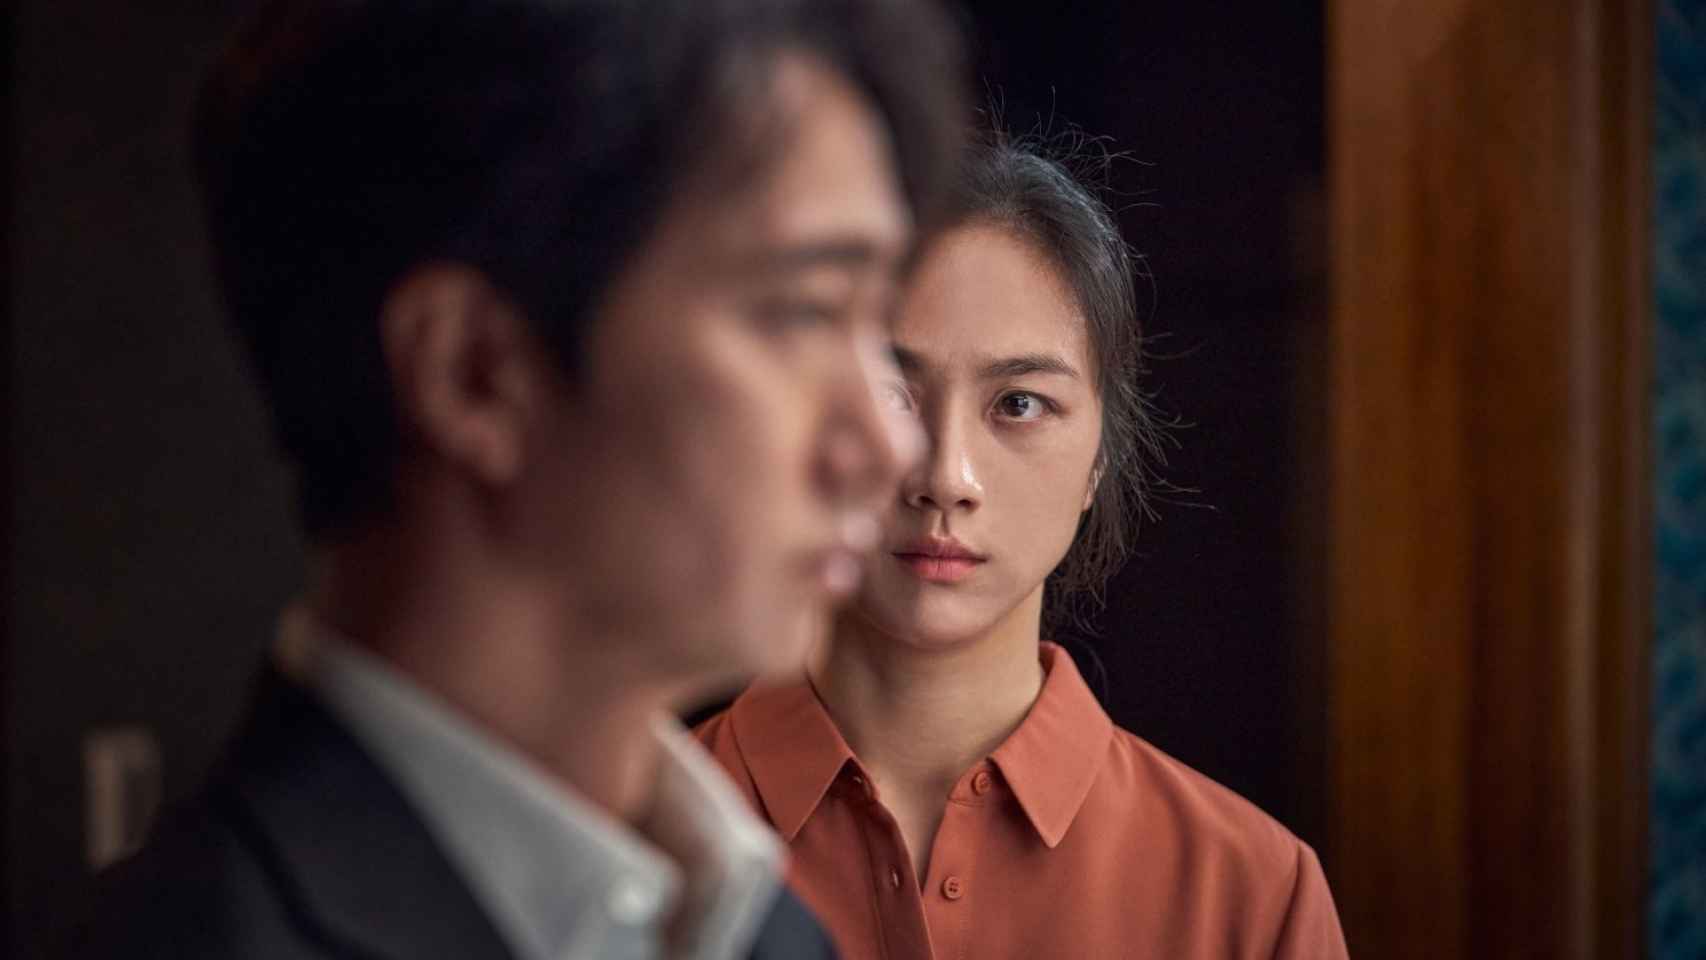 Decision To Leave (Park Chan-wook)